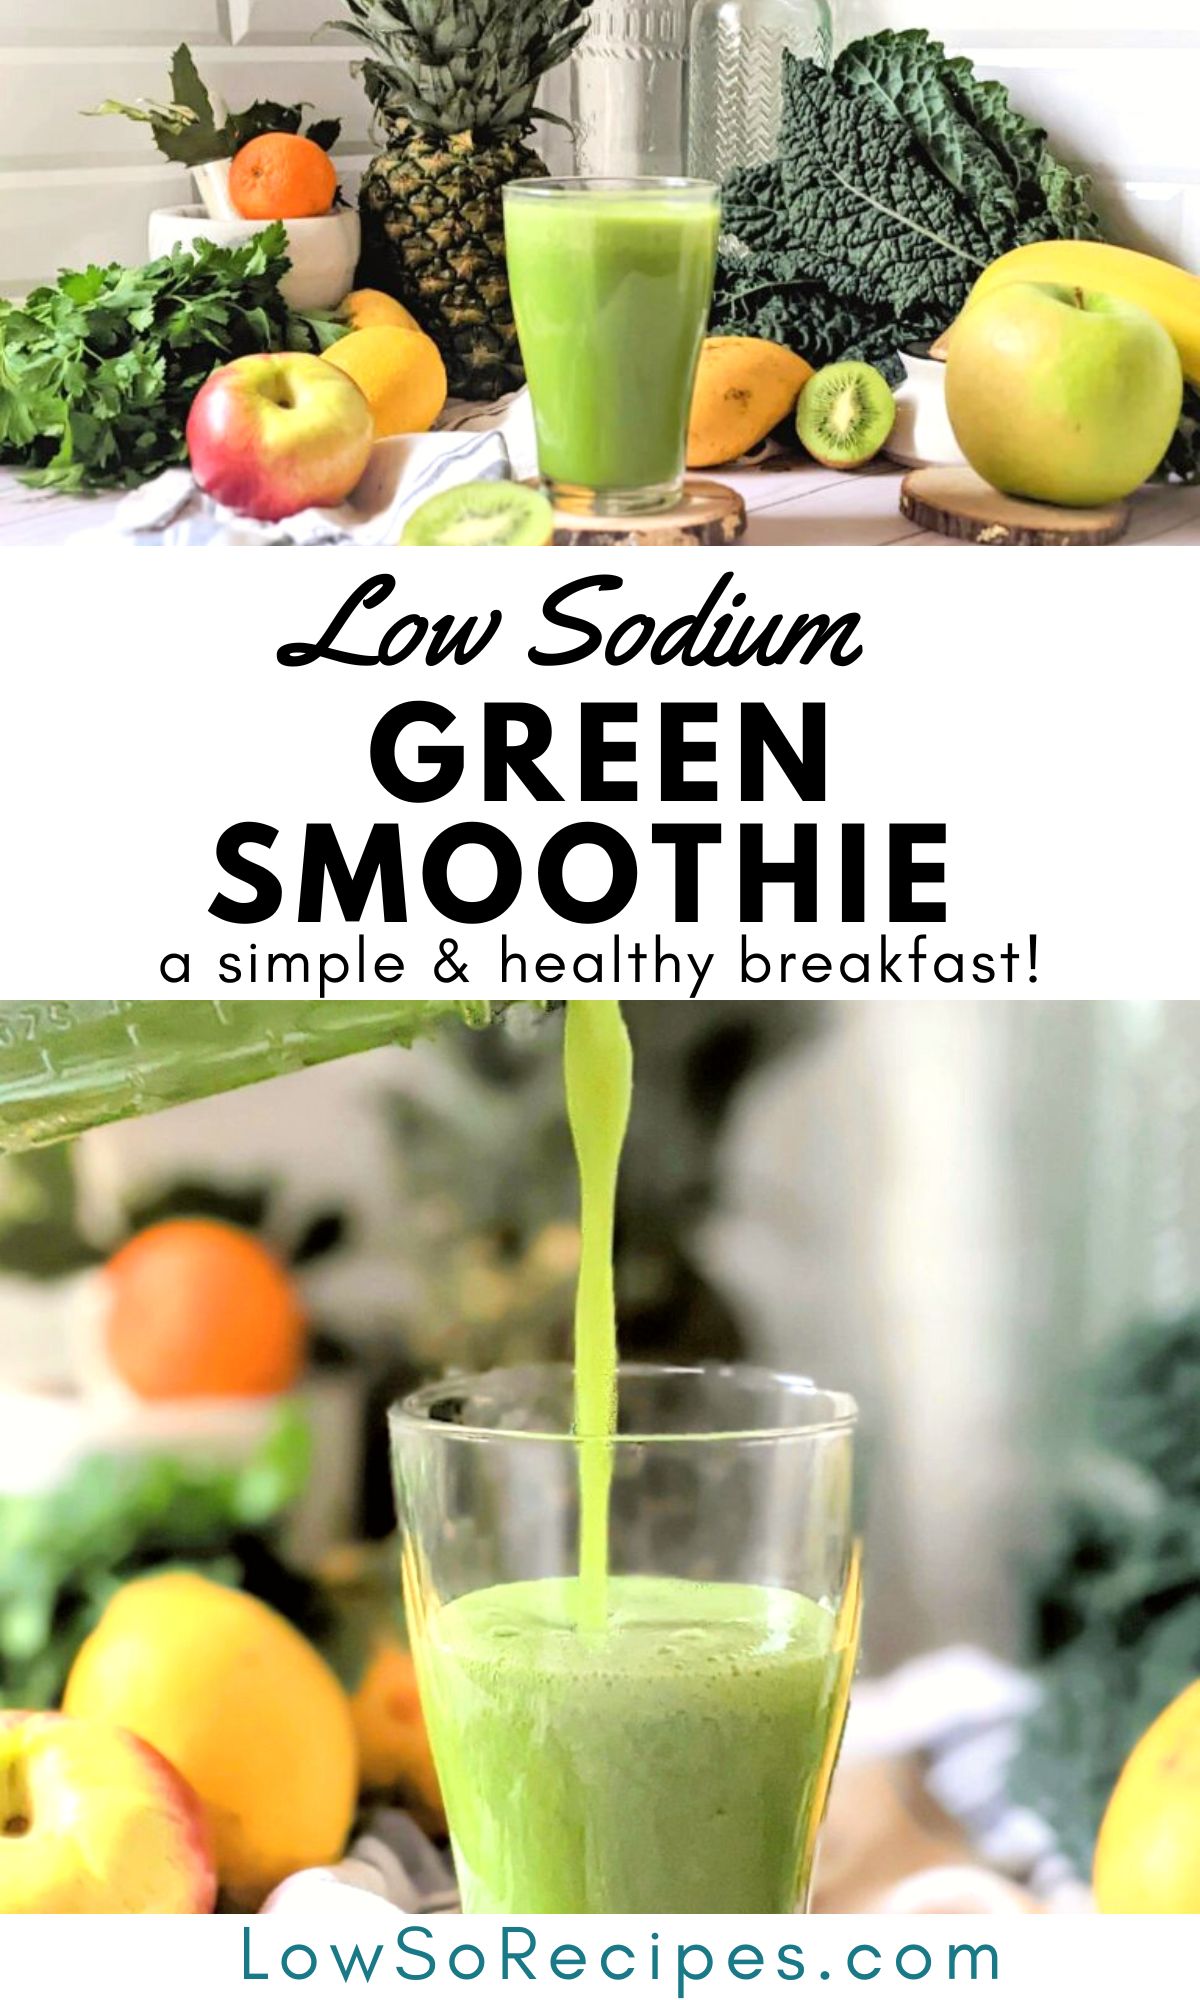 low sodium green smoothie recipe with no added salt or protein powder healthy fruit smoothie with spinach low sodium breakfast ideas